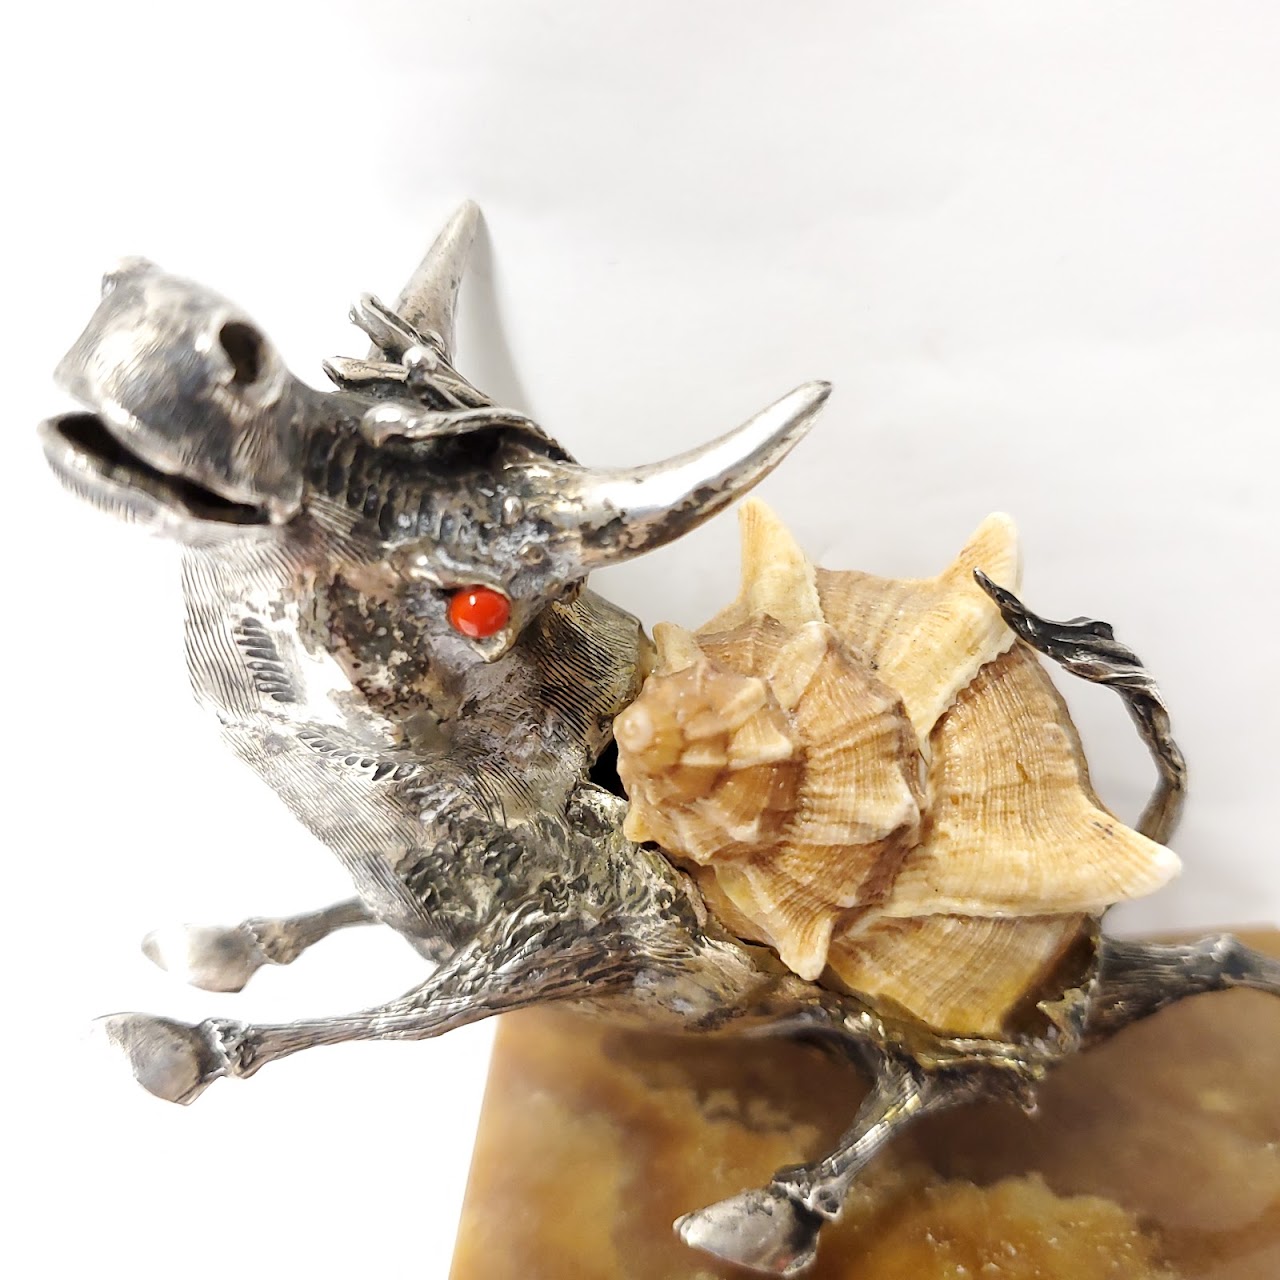 Silver and Shell Bull Figurine